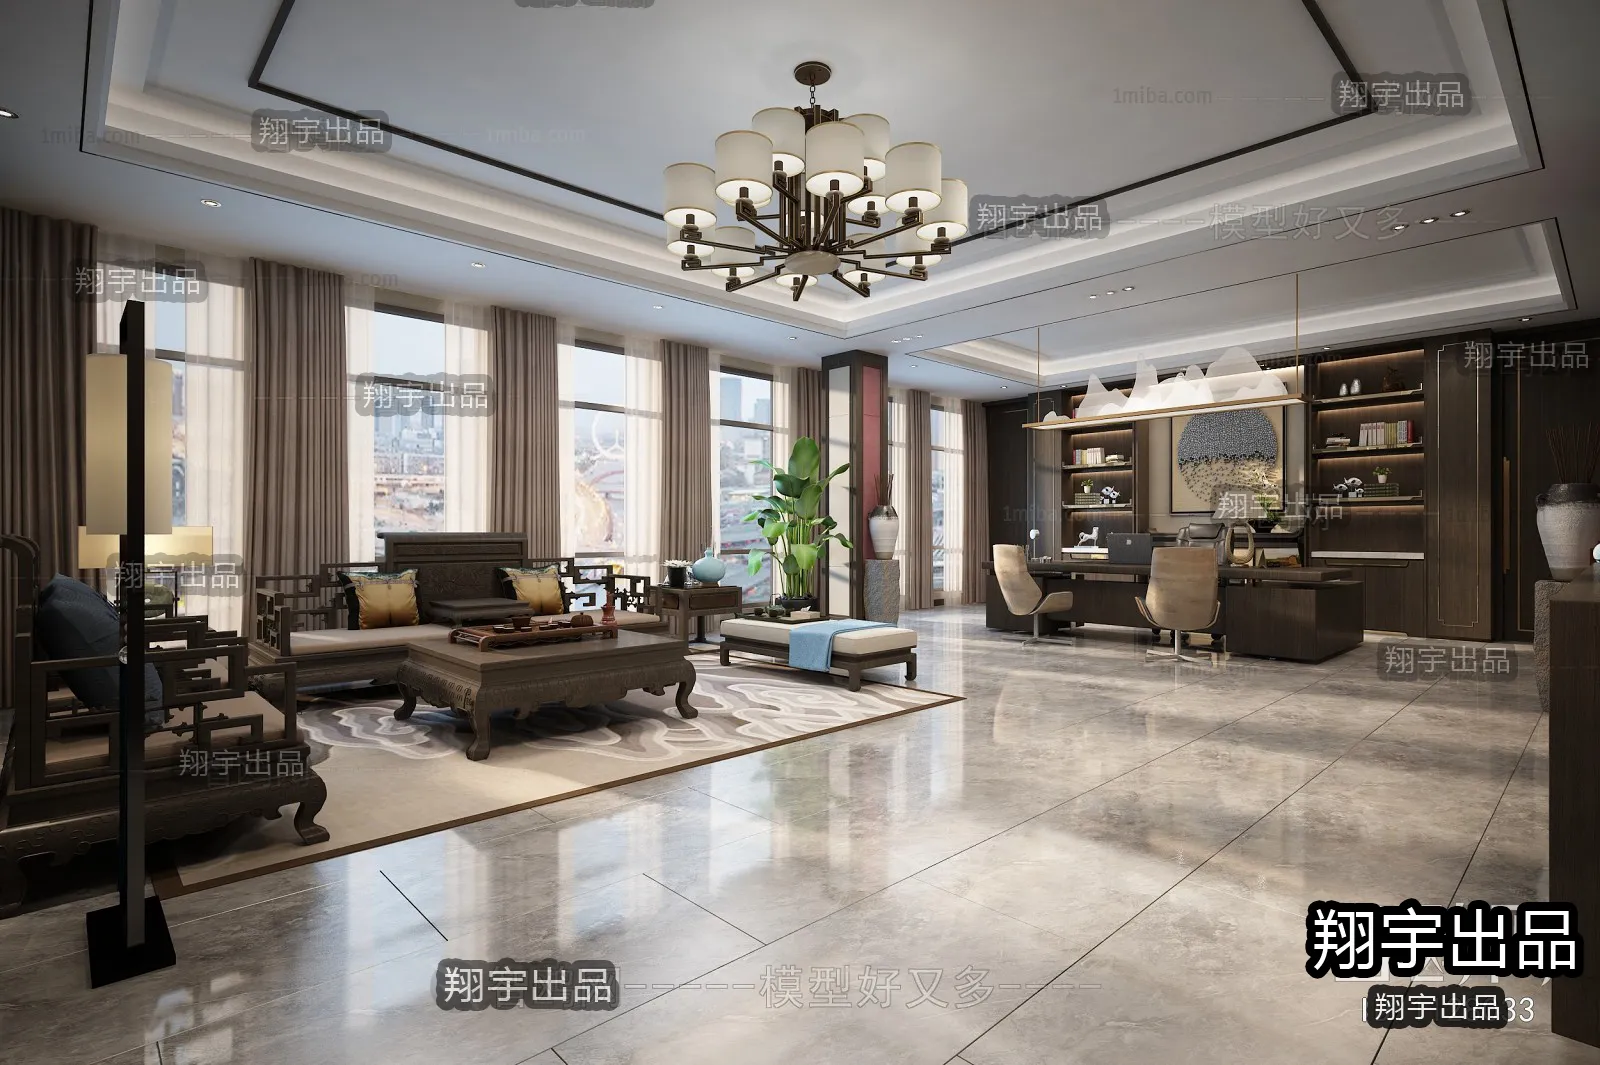 3D OFFICE INTERIOR (VRAY) – MANAGER ROOM 3D SCENES – 104